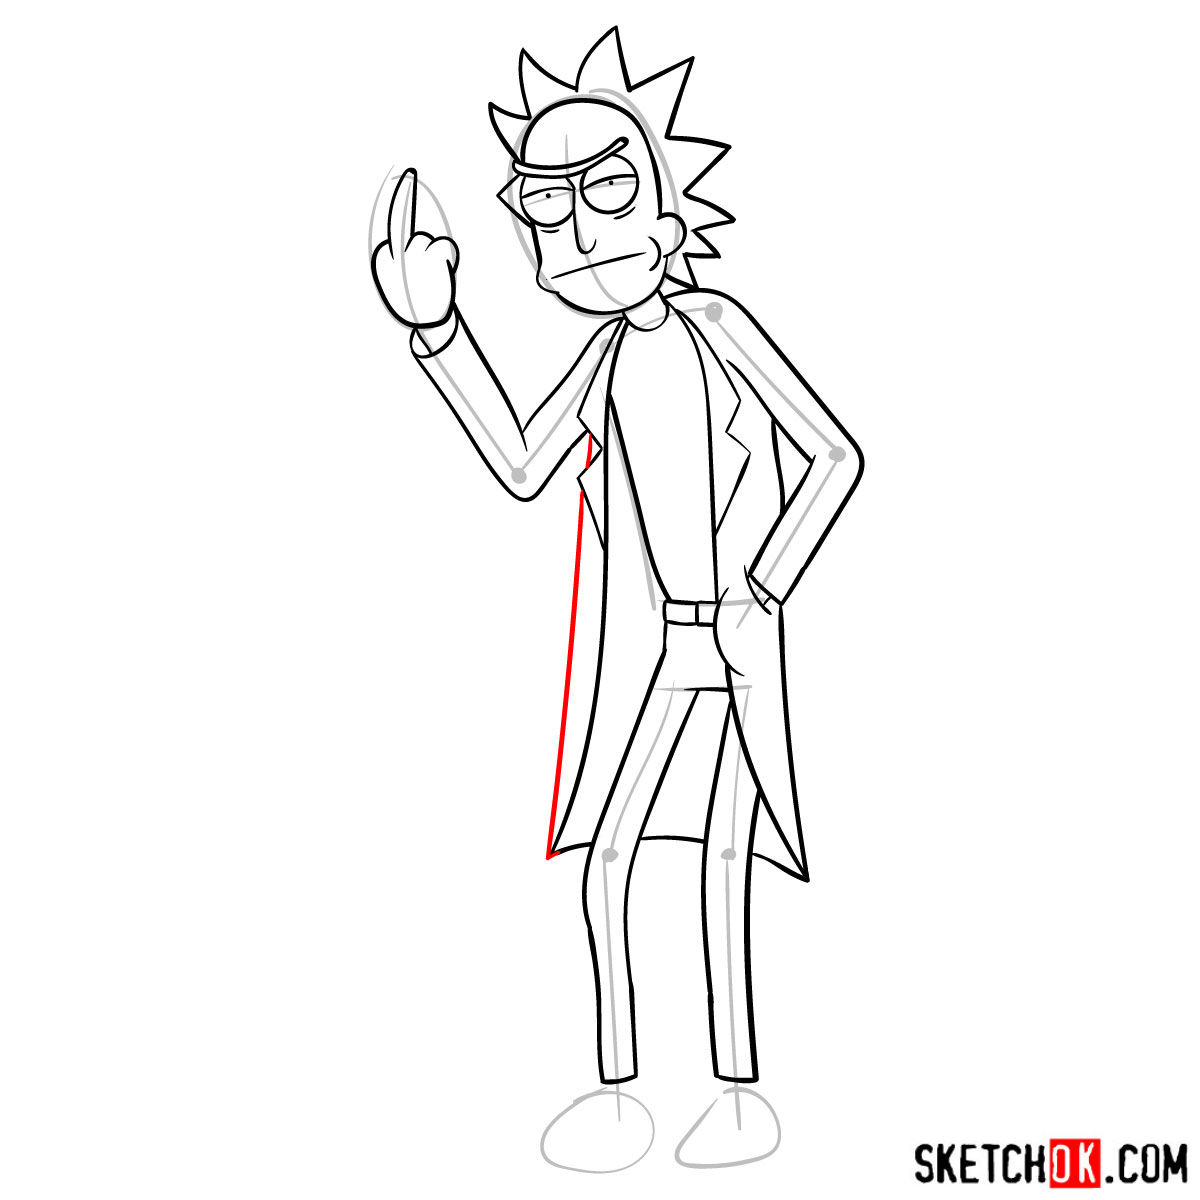 How to draw Rick showing his middle finger (Rick and Morty) - step 12